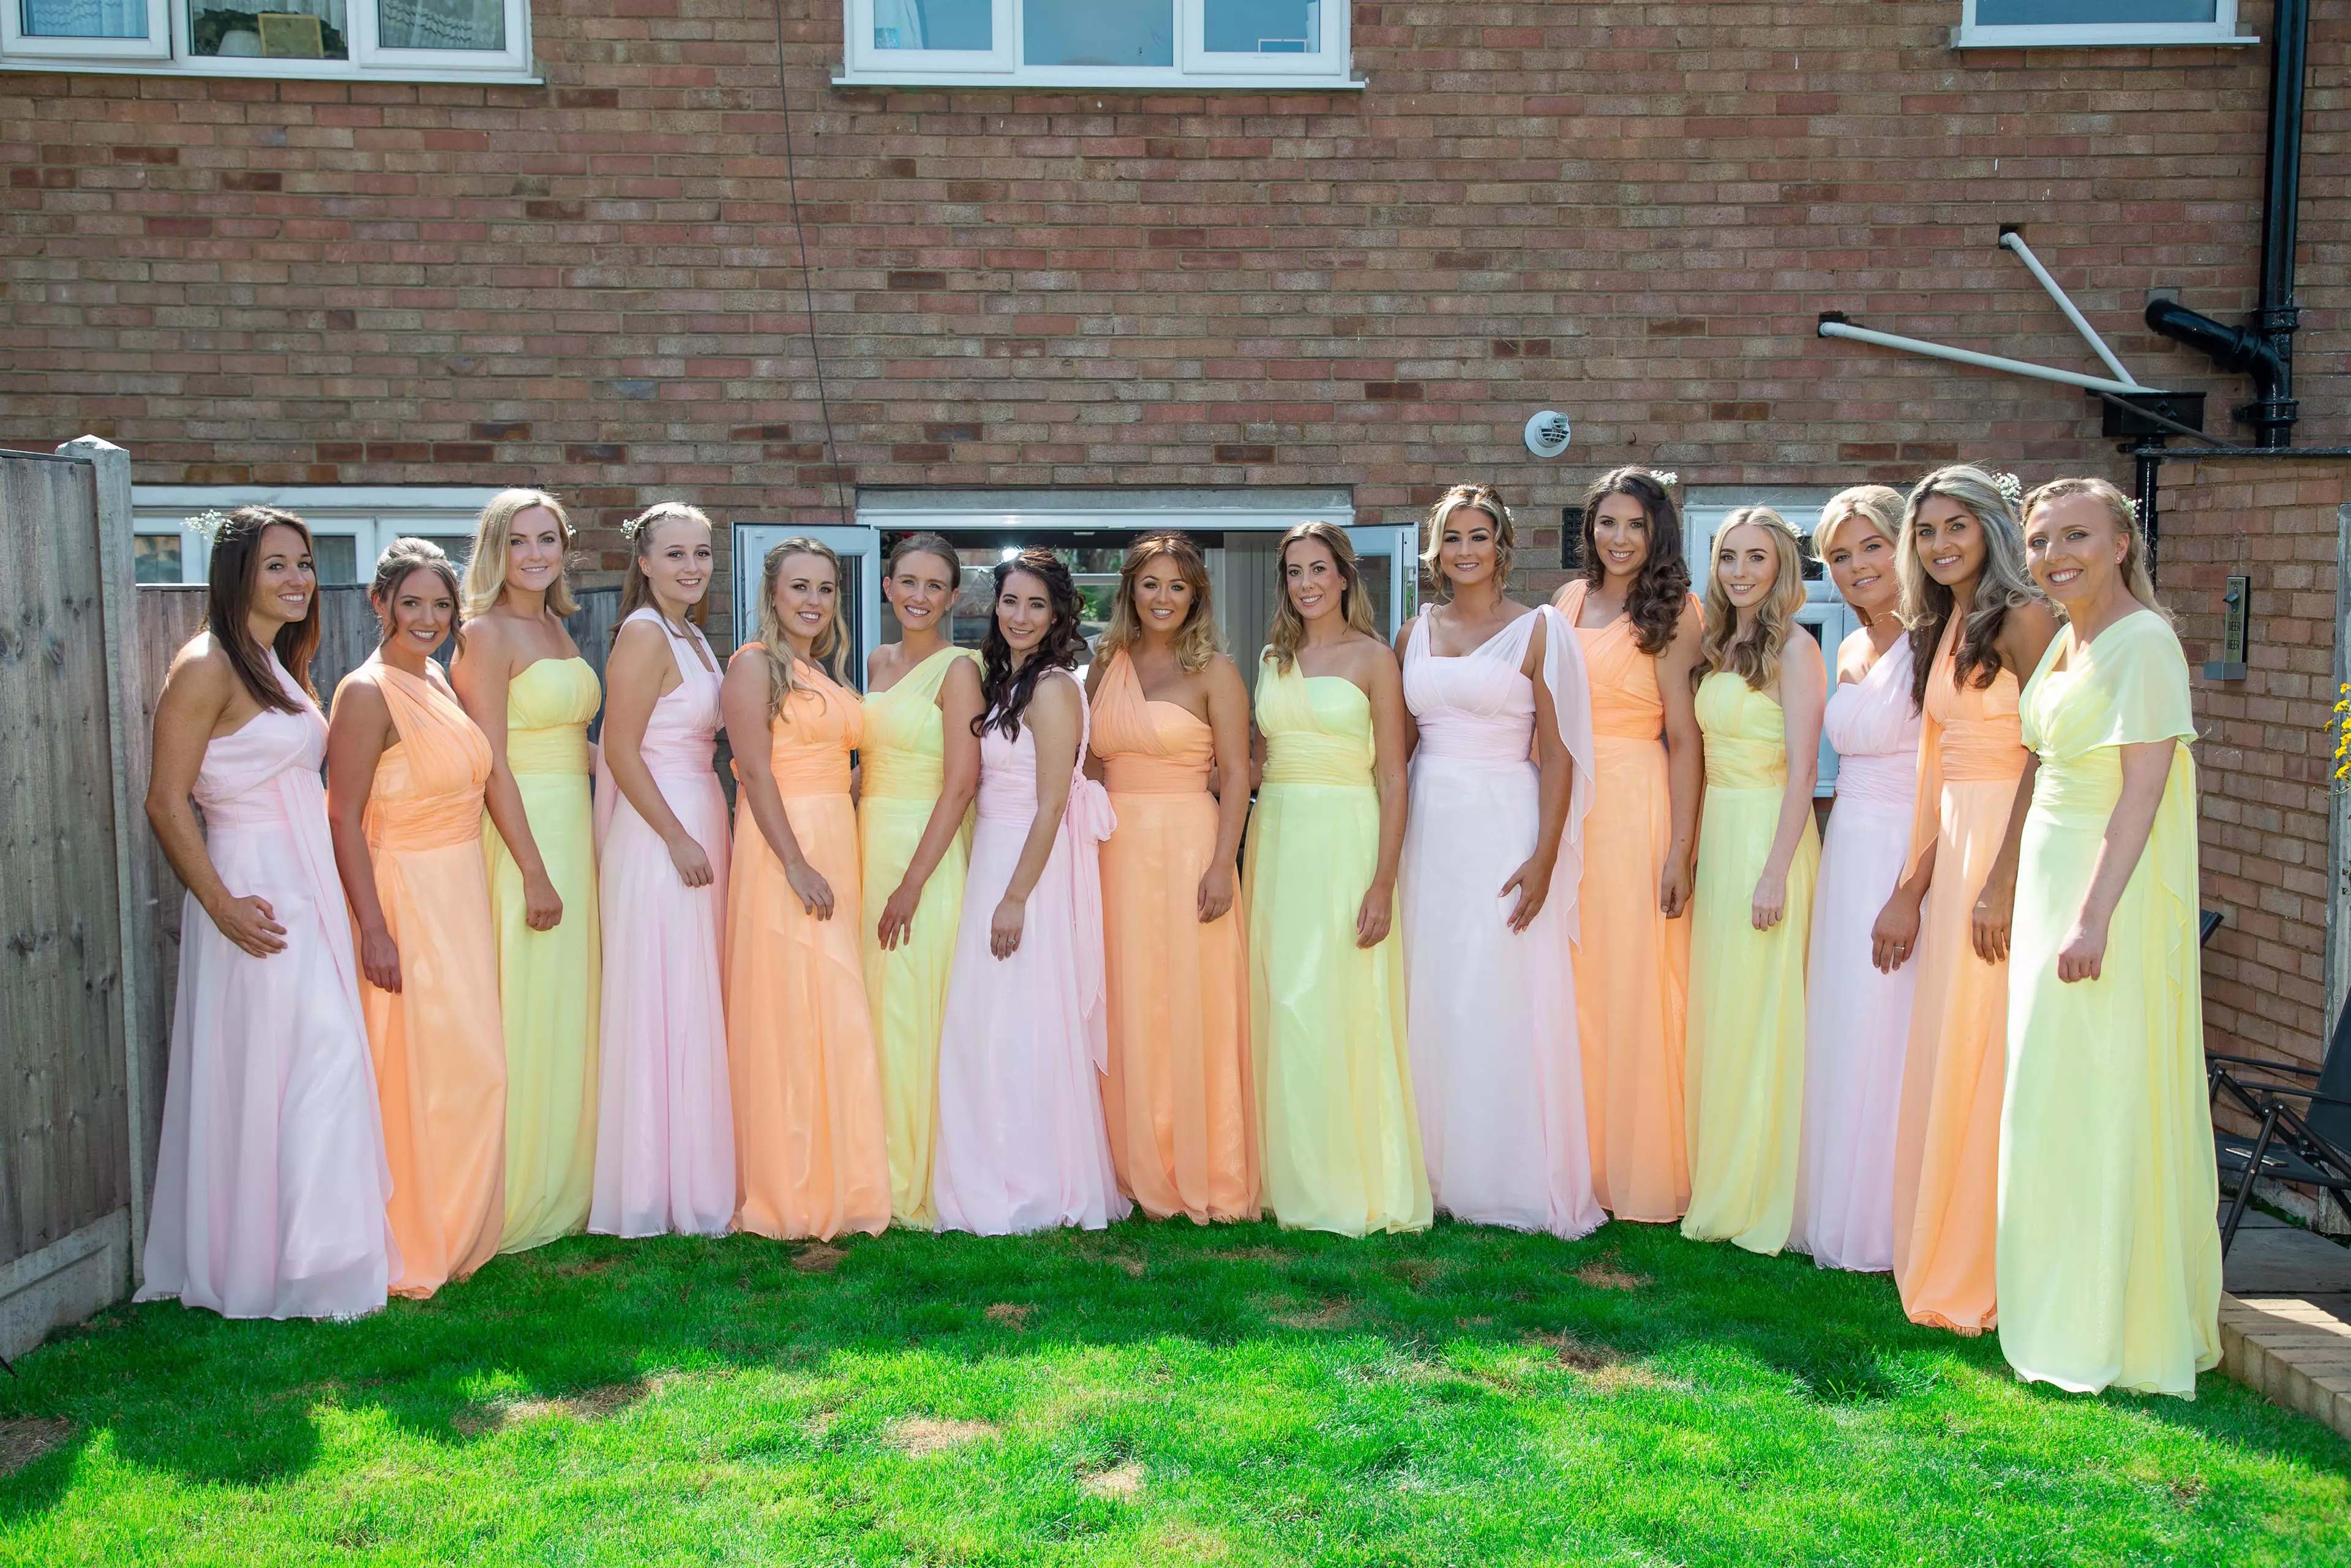 The bride picked three pastel colours for her 'maids (